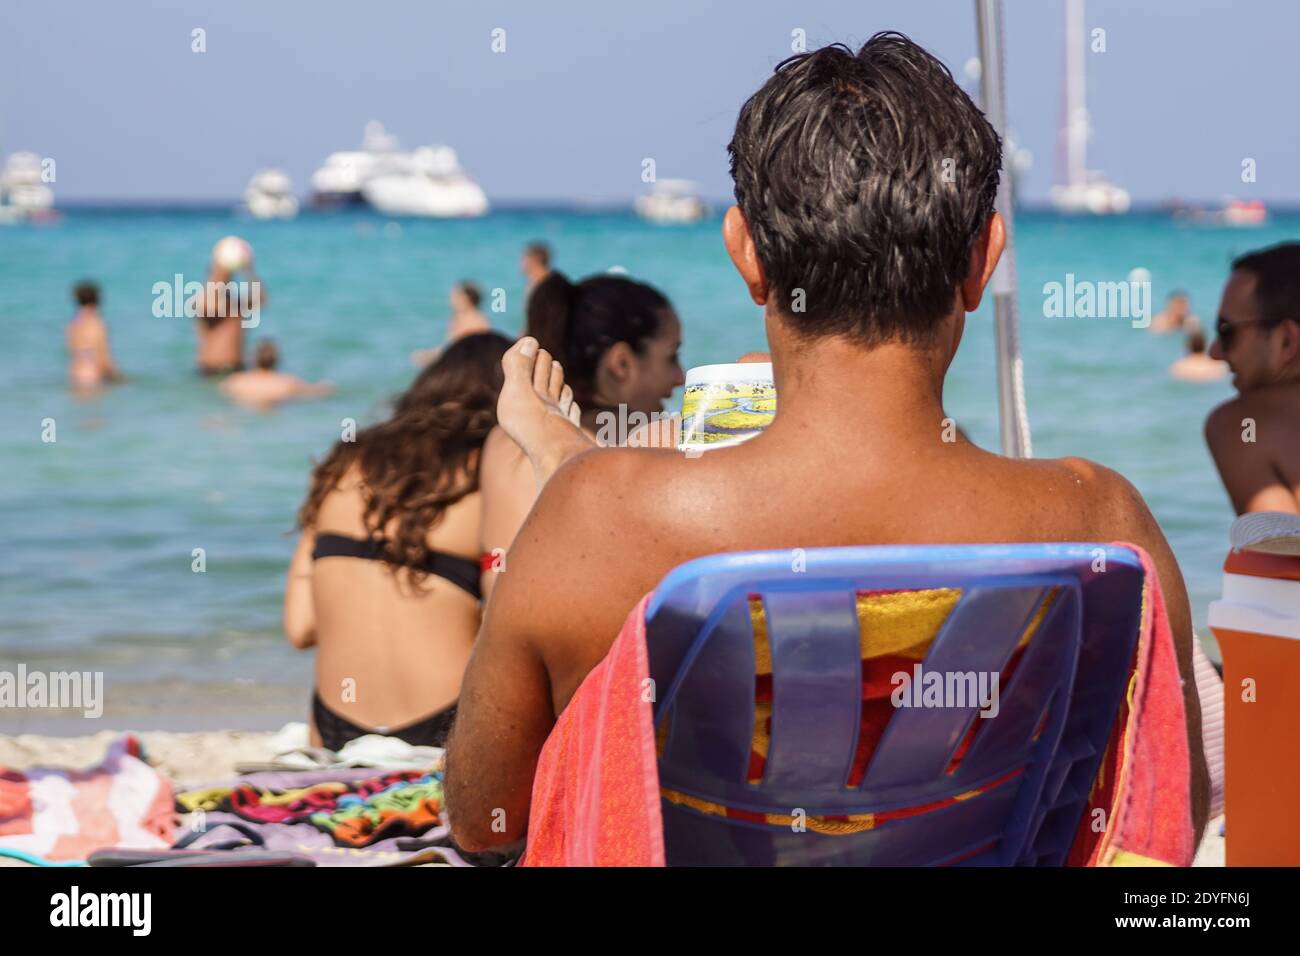 Sardegna , Italy - July 28, 2020 : Unidentified tourists or people they relax by doing leisure activities on the beach in italy Stock Photo